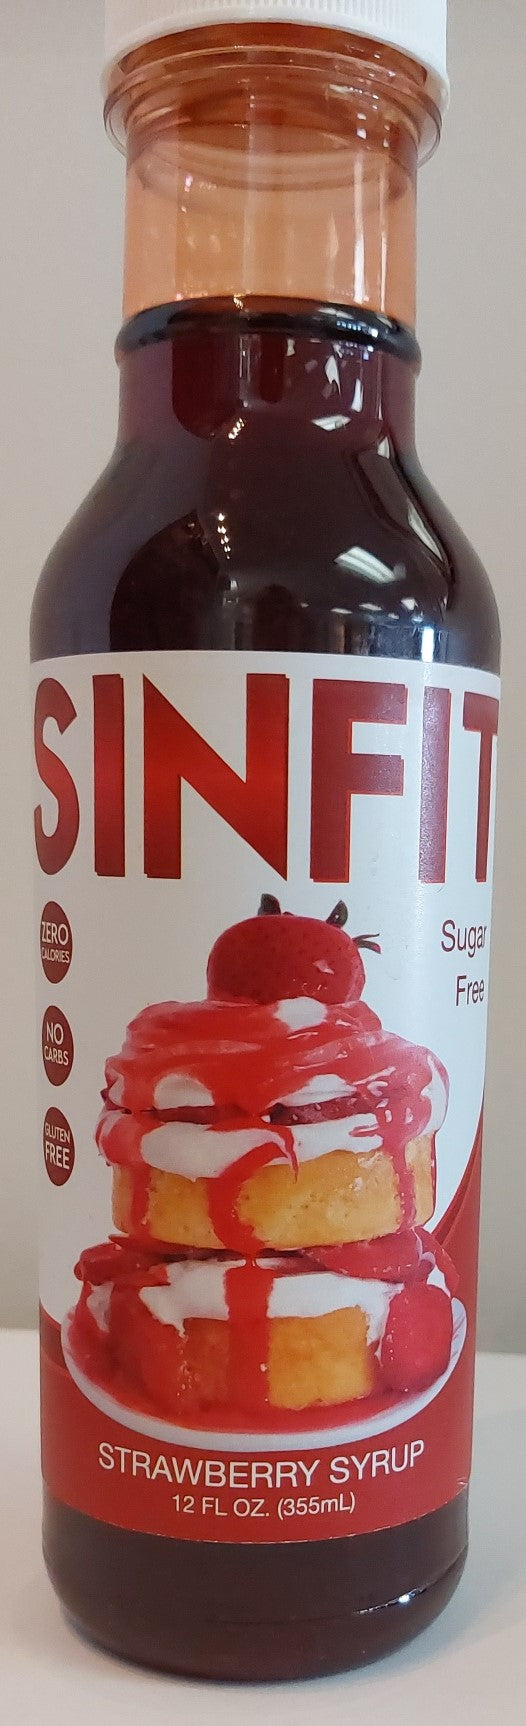 Ketopia Foods: SinFit Strawberry Syrup (355ml)